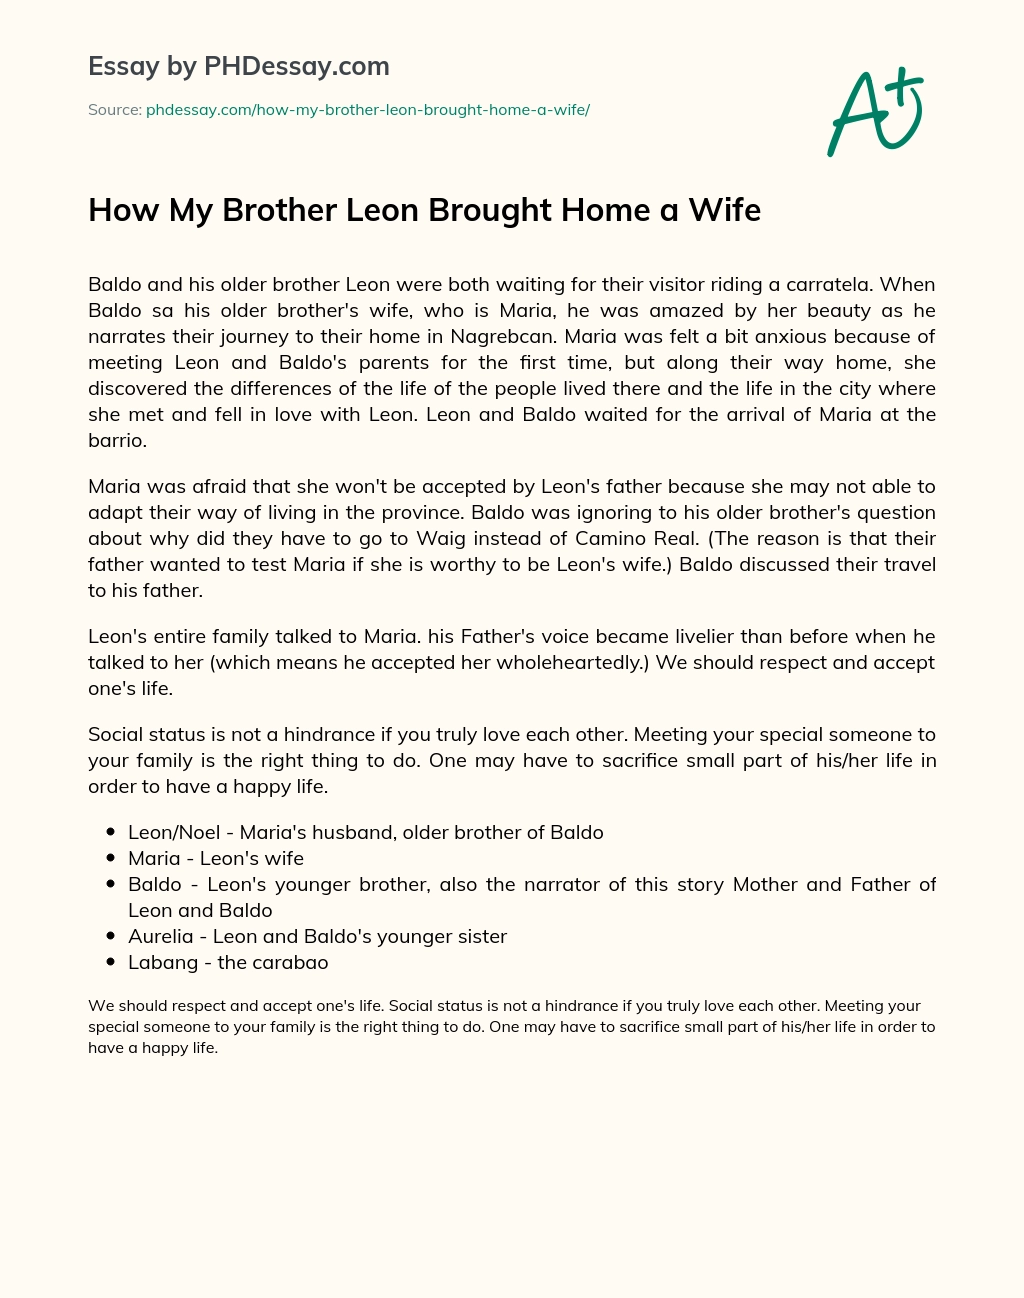 How My Brother Leon Brought Home a Wife essay